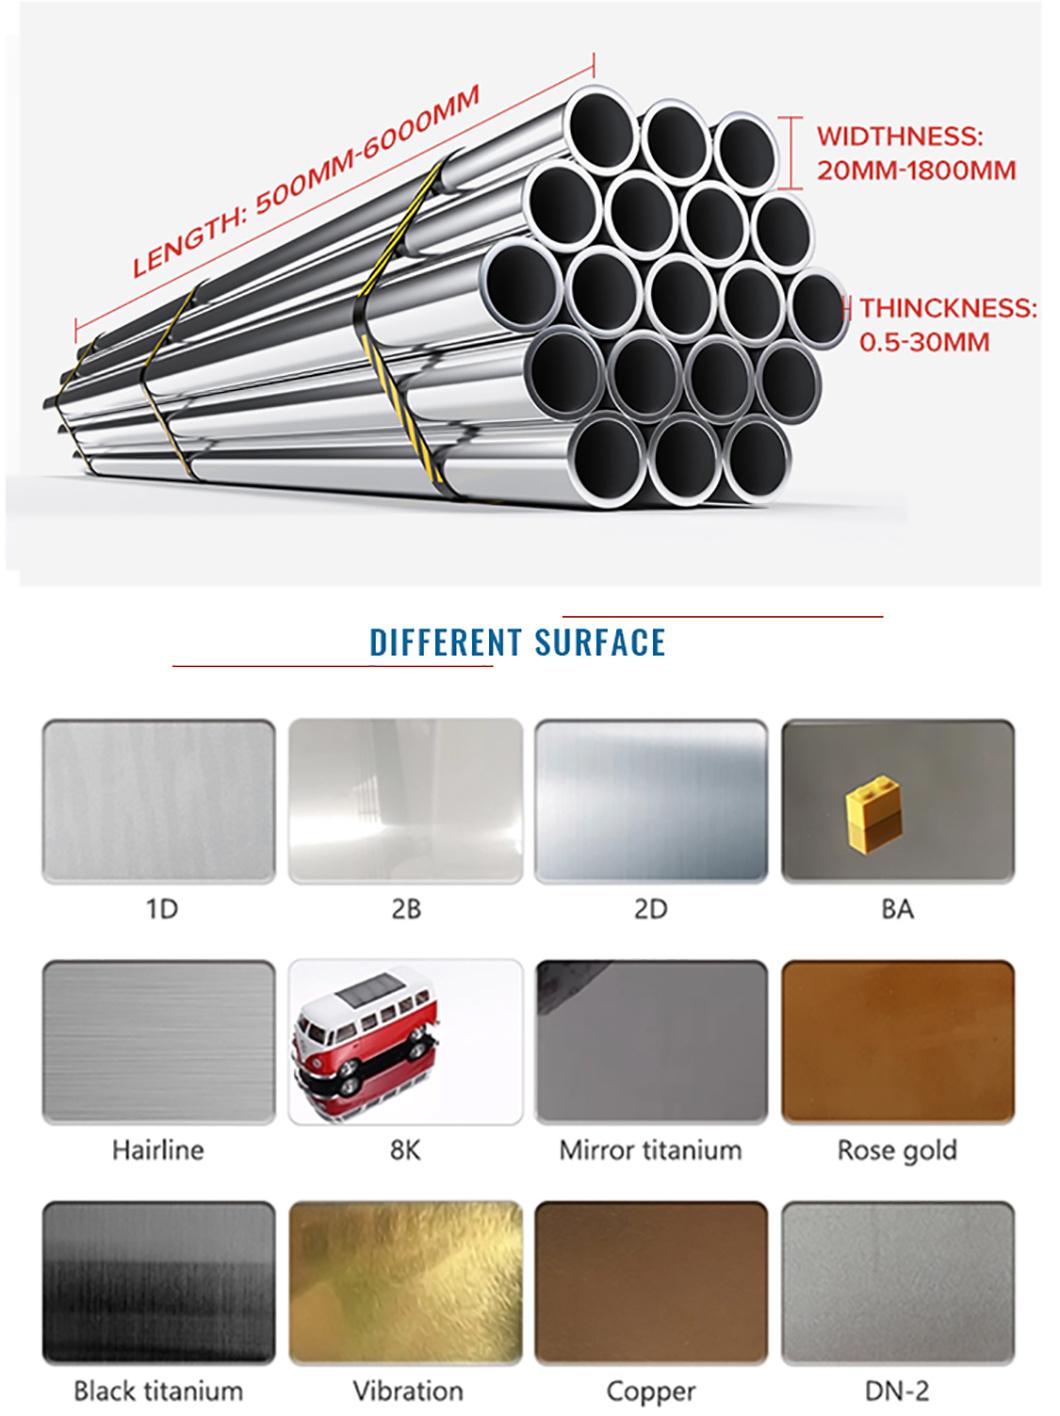 Experienced Supplier ASTM Welded 304 Stainless Steel Tube